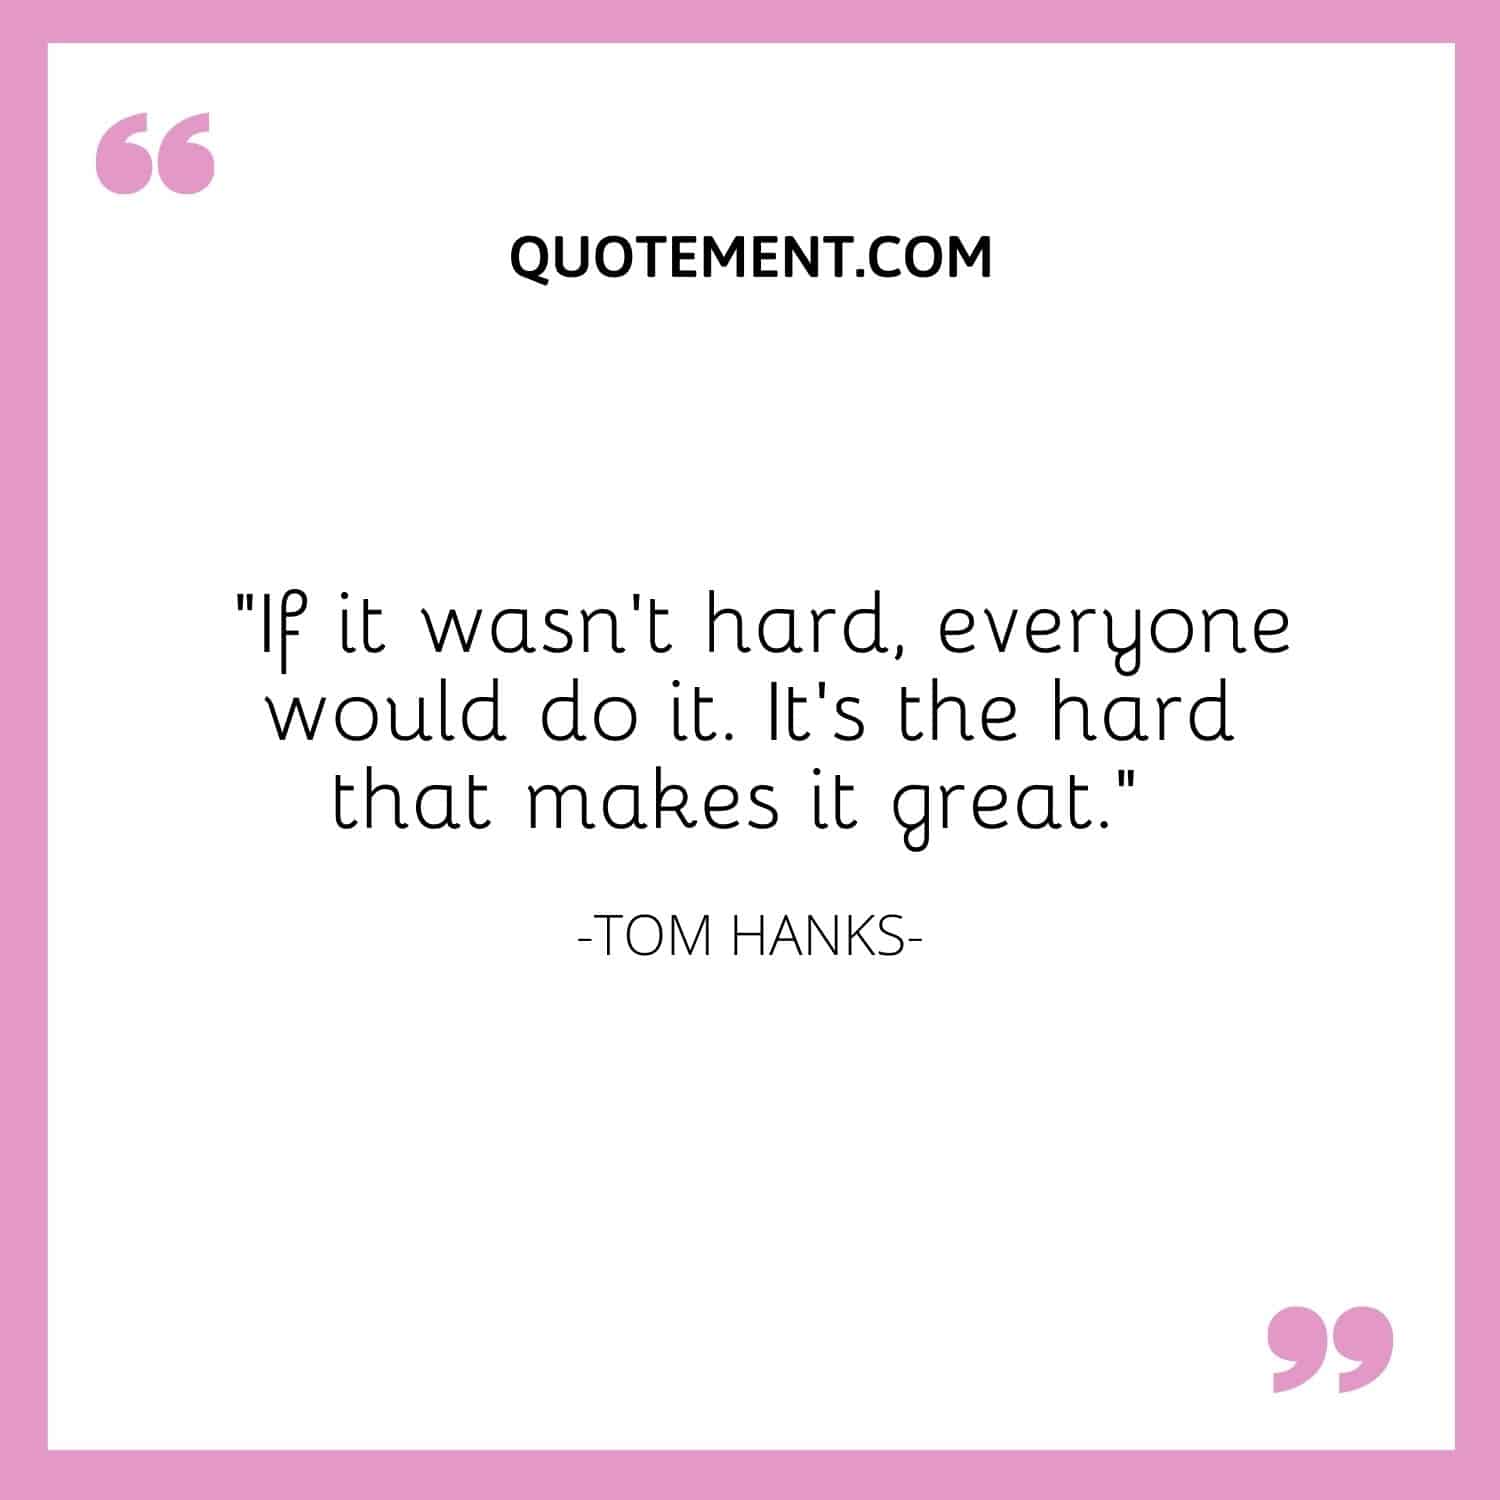 If it wasn’t hard, everyone would do it. It’s the hard that makes it great